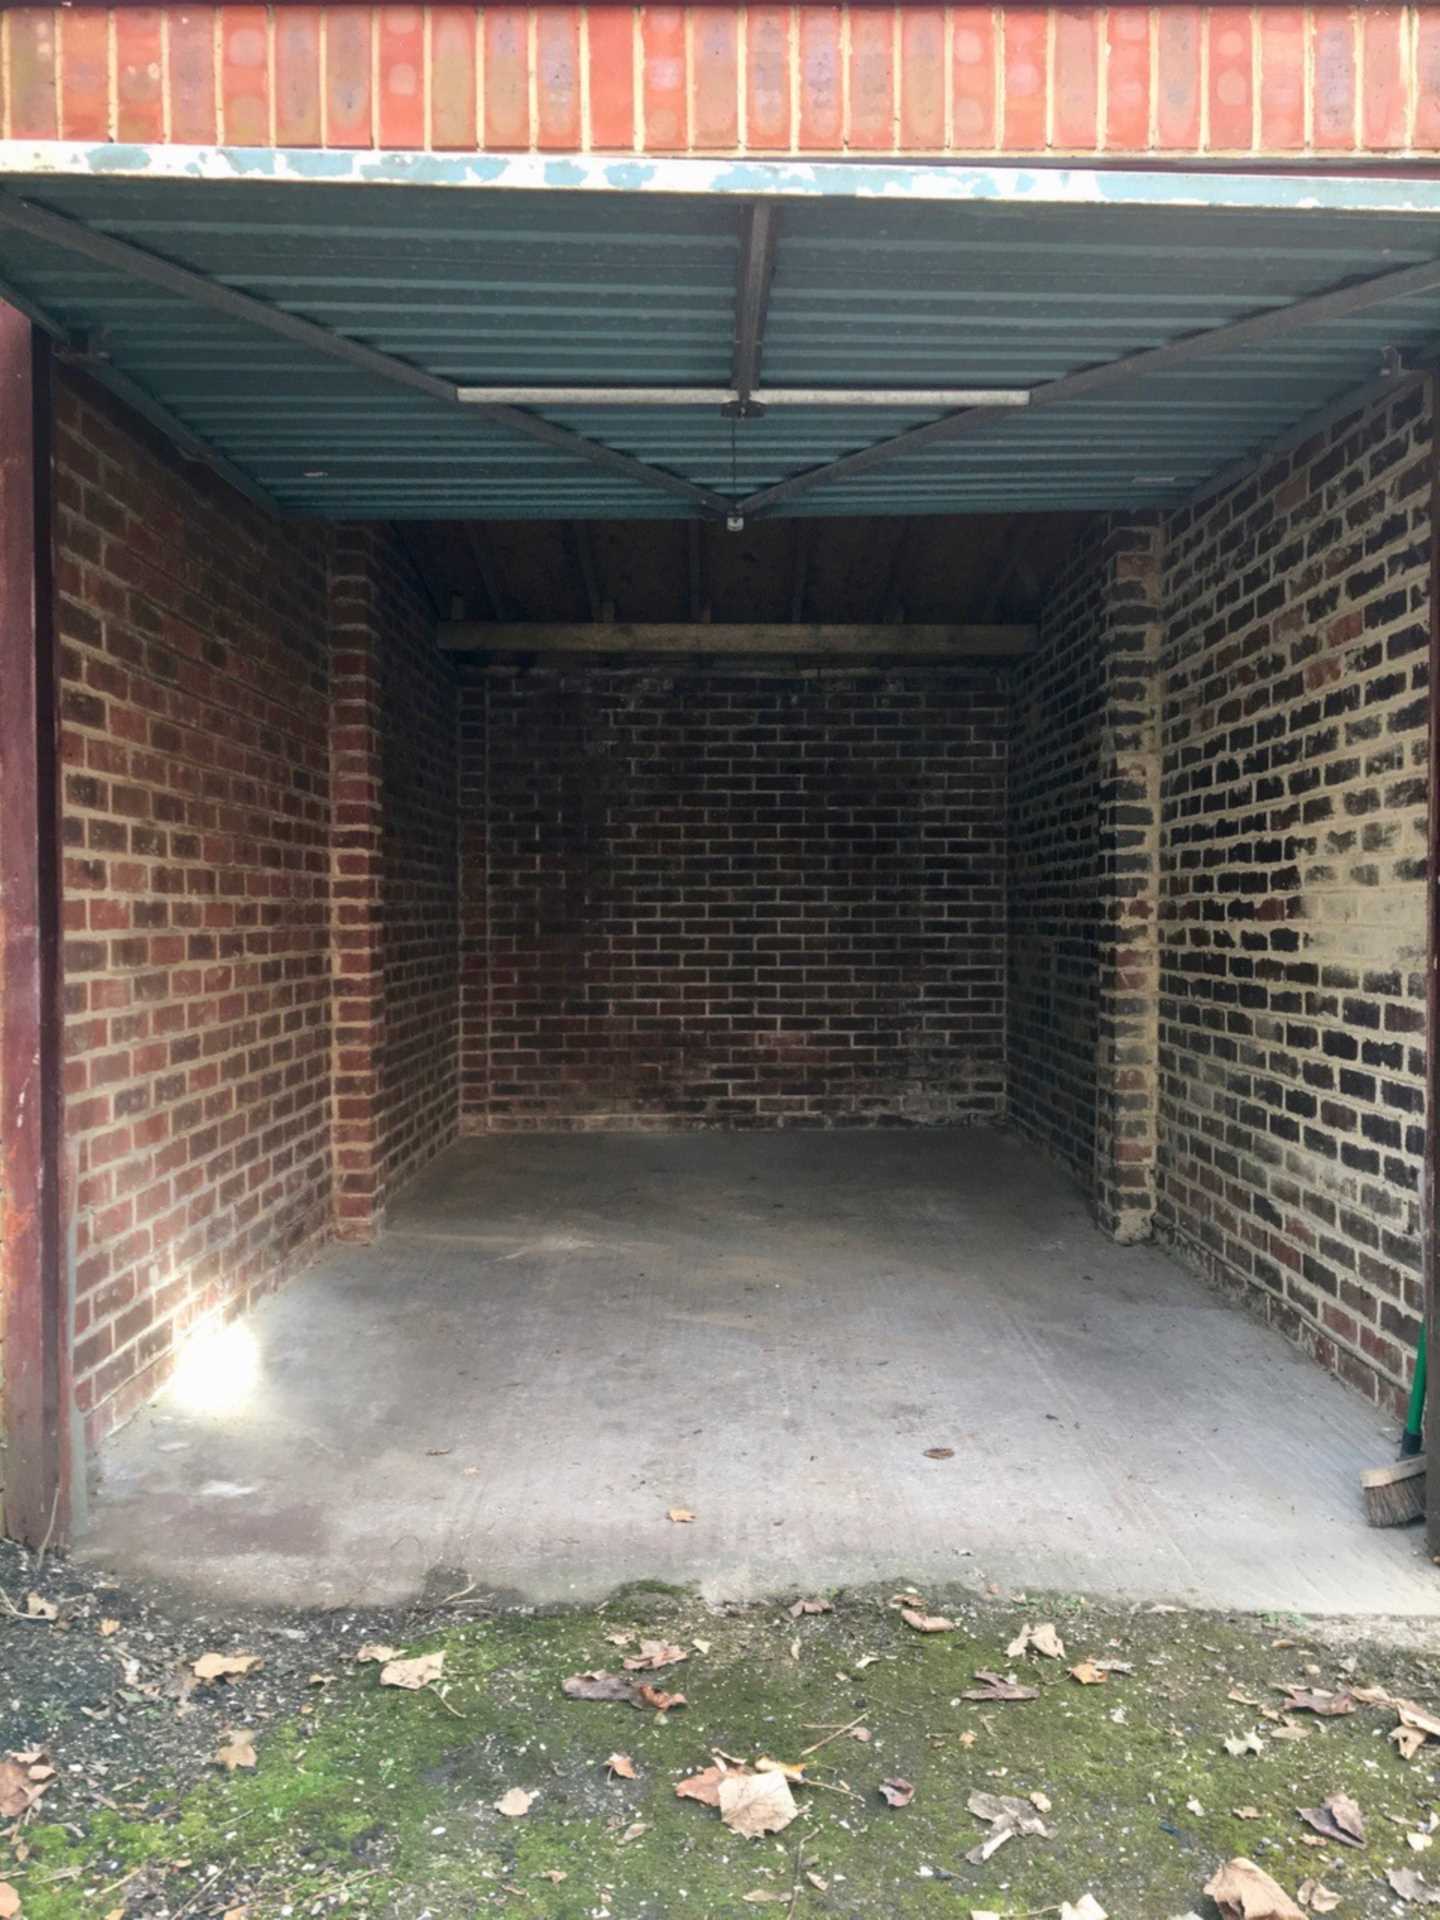 0 bed Garage for rent in Sutton. From The Personal Agent - Epsom